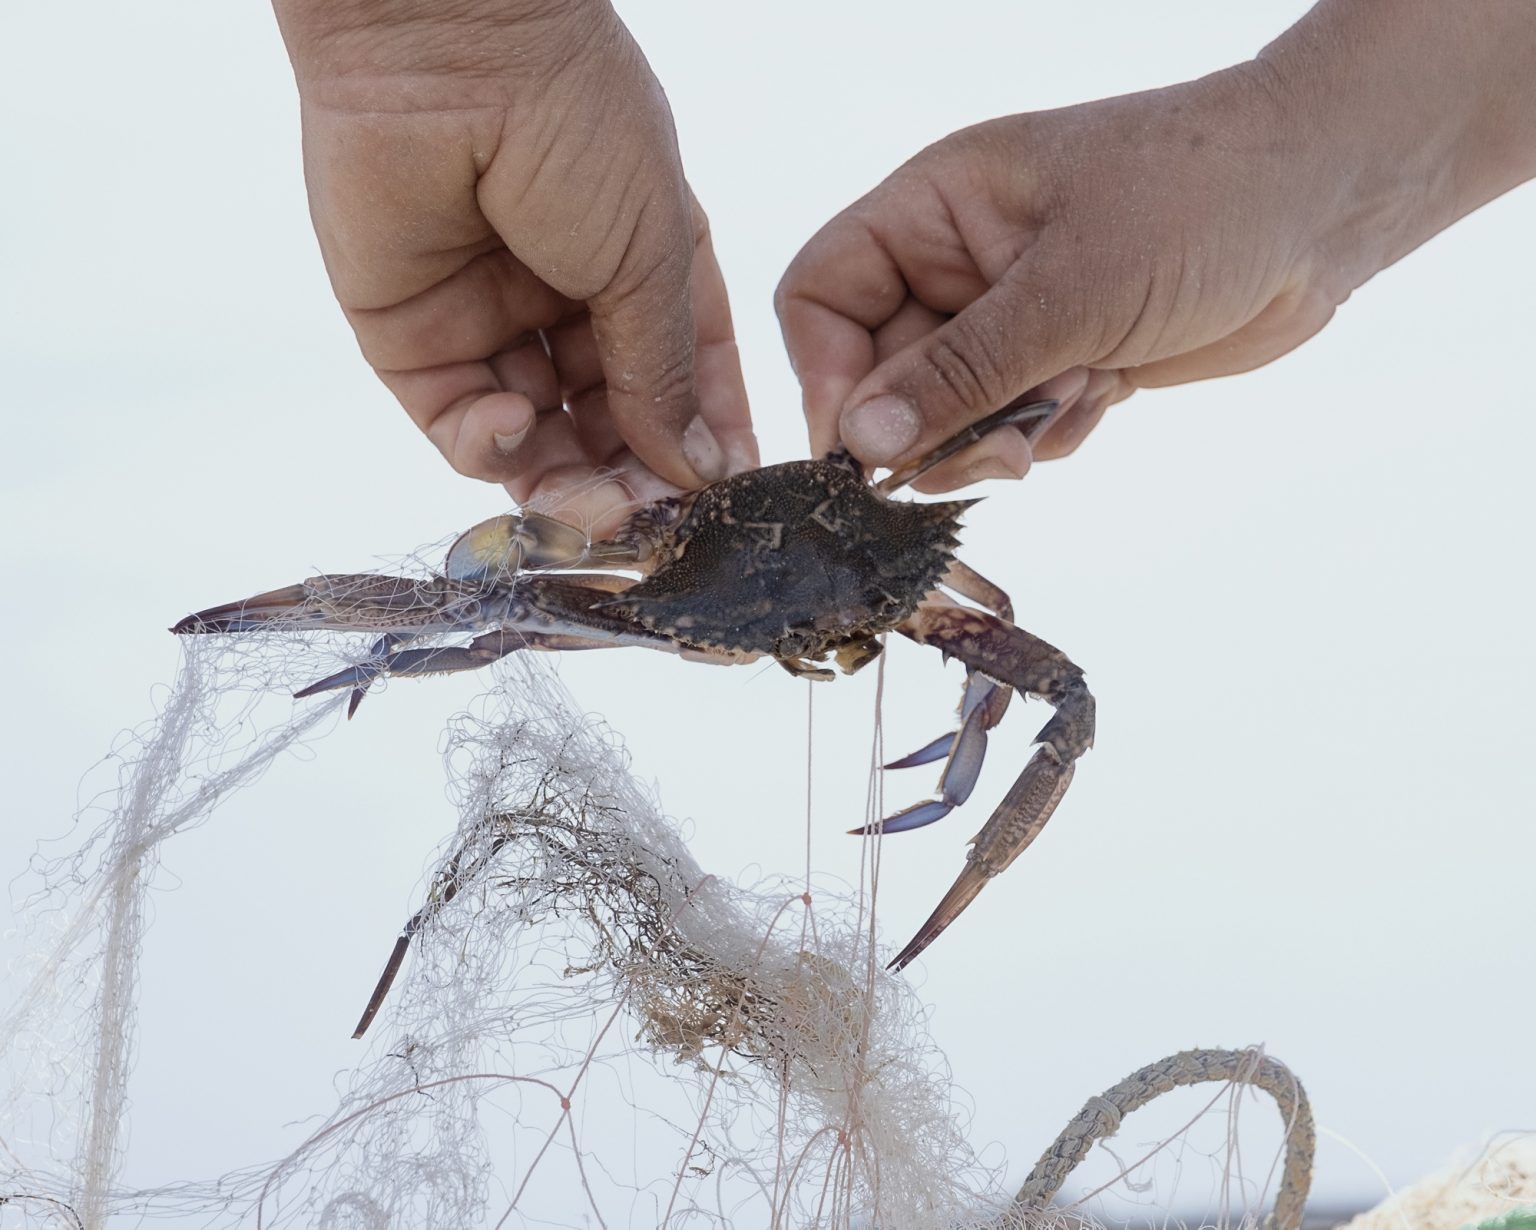 Kerkennah Islands (Tunisia), June 2022 - A crab entangled in fishing nets. The blue crab (Portunus segnis) is an invasive alien species from the Red Sea, which arrived in the Gulf of Gabès in 2014, with a population explosion in August 2015, finding favorable conditions for its settlement thanks to the vulnerability of the ecosystem and climate change. Along with other factors, including pollution and intensive fishing, the blue crab is among the causes that have led to the decline of marine biodiversity in the gulf. Nicknamed 'Daesh' by fishermen because of its devastating impact on the marine ecosystem and on fishing nets that are cut by the power of the claws and the spines around them, this crab feeds on many of the marine species present in the gulf, mainly crustaceans, molluscs and fish. It is assumed that the route of introduction into the Mediterranean was that of maritime traffic, within the ballast waters of the ships.
><
Isole Kerkennah (Tunisia), giugno 2022 - Un granchio impigliato nelle reti da pesca. Il granchio blu (Portunus segnis) è una specie aliena invasiva proveniente dal Mar Rosso, arrivata nel Golfo di Gabès nel 2014, con unesplosione demografica nellagosto del 2015, trovando condizioni favorevoli al suo insediamento grazie alla vulnerabilità dellecosistema e ai cambiamenti climatici. Insieme ad altri fattori, tra cui linquinamento e la pesca intensiva, il granchio blu è tra le cause che hanno portato al declino della biodiversità marina nel golfo. Soprannominato dai pescatori Daesh a causa del suo impatto devastante sullecosistema e sulle reti da pesca, che vengono tagliate dalle potenza delle chele e dalle spine presenti attorno ad esse, questo granchio si ciba di molte delle specie marine presenti nel golfo, principalmente crostacei, molluschi e pesci. Si ipotizza che la via di introduzione nel Mediterraneo sia stata quella del traffico marittimo, allinterno delle acque di zavorra delle navi.